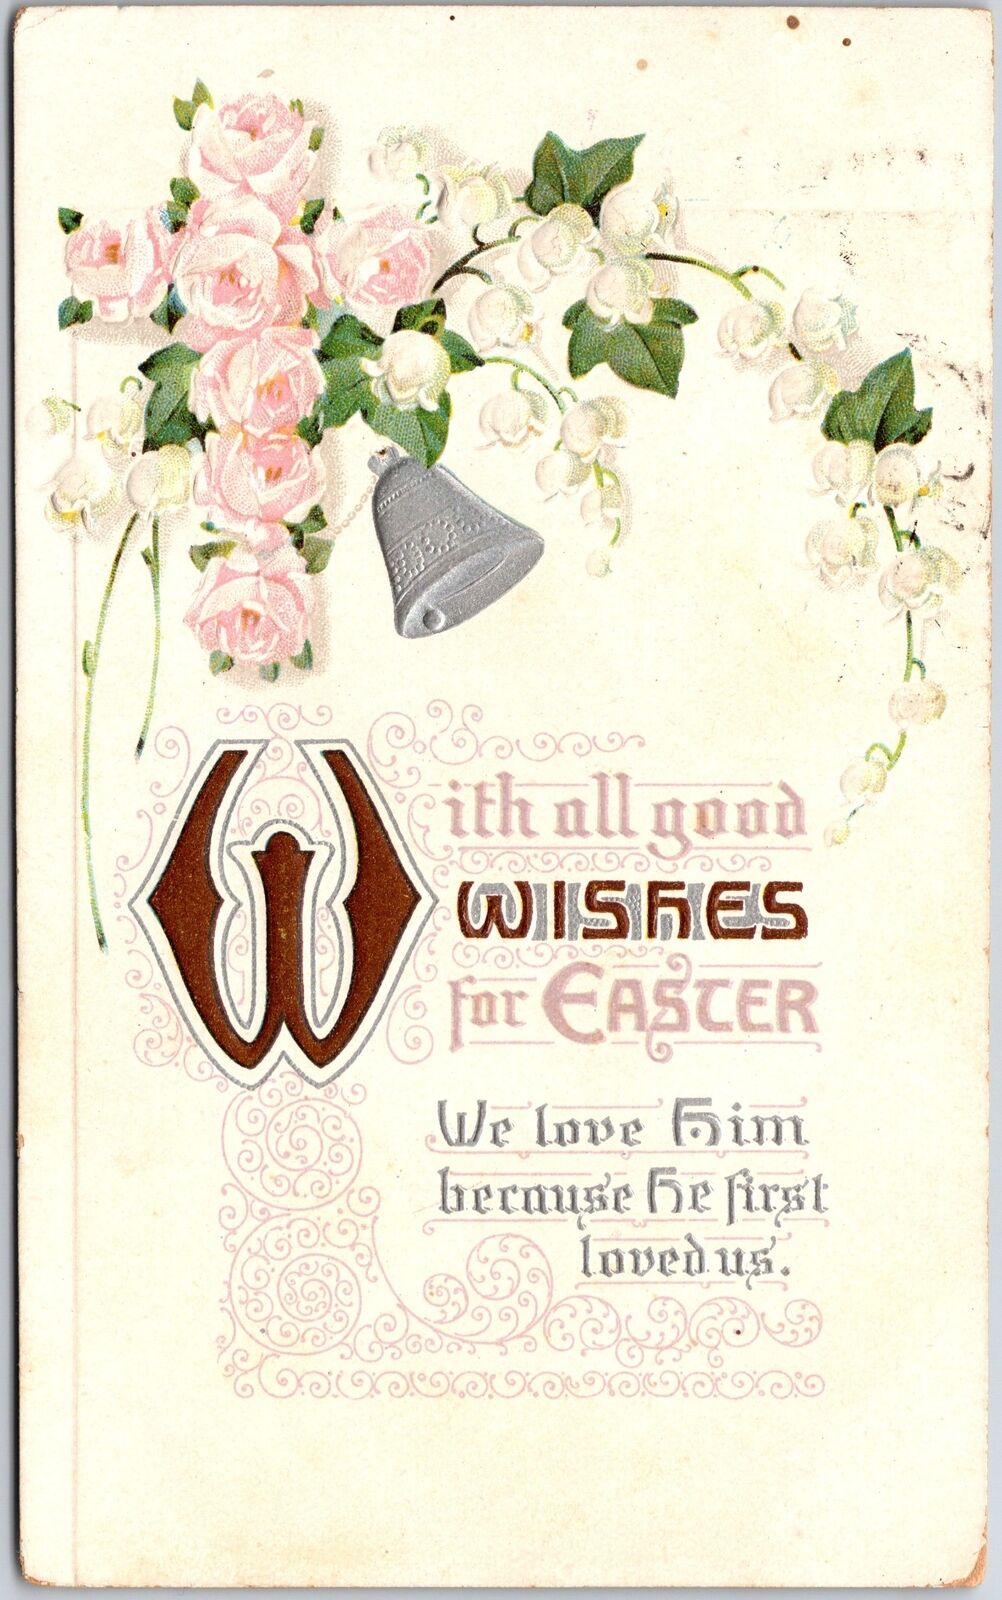 1911 With All Good Wishes For Eater Pink & White Flowers Posted Postcard